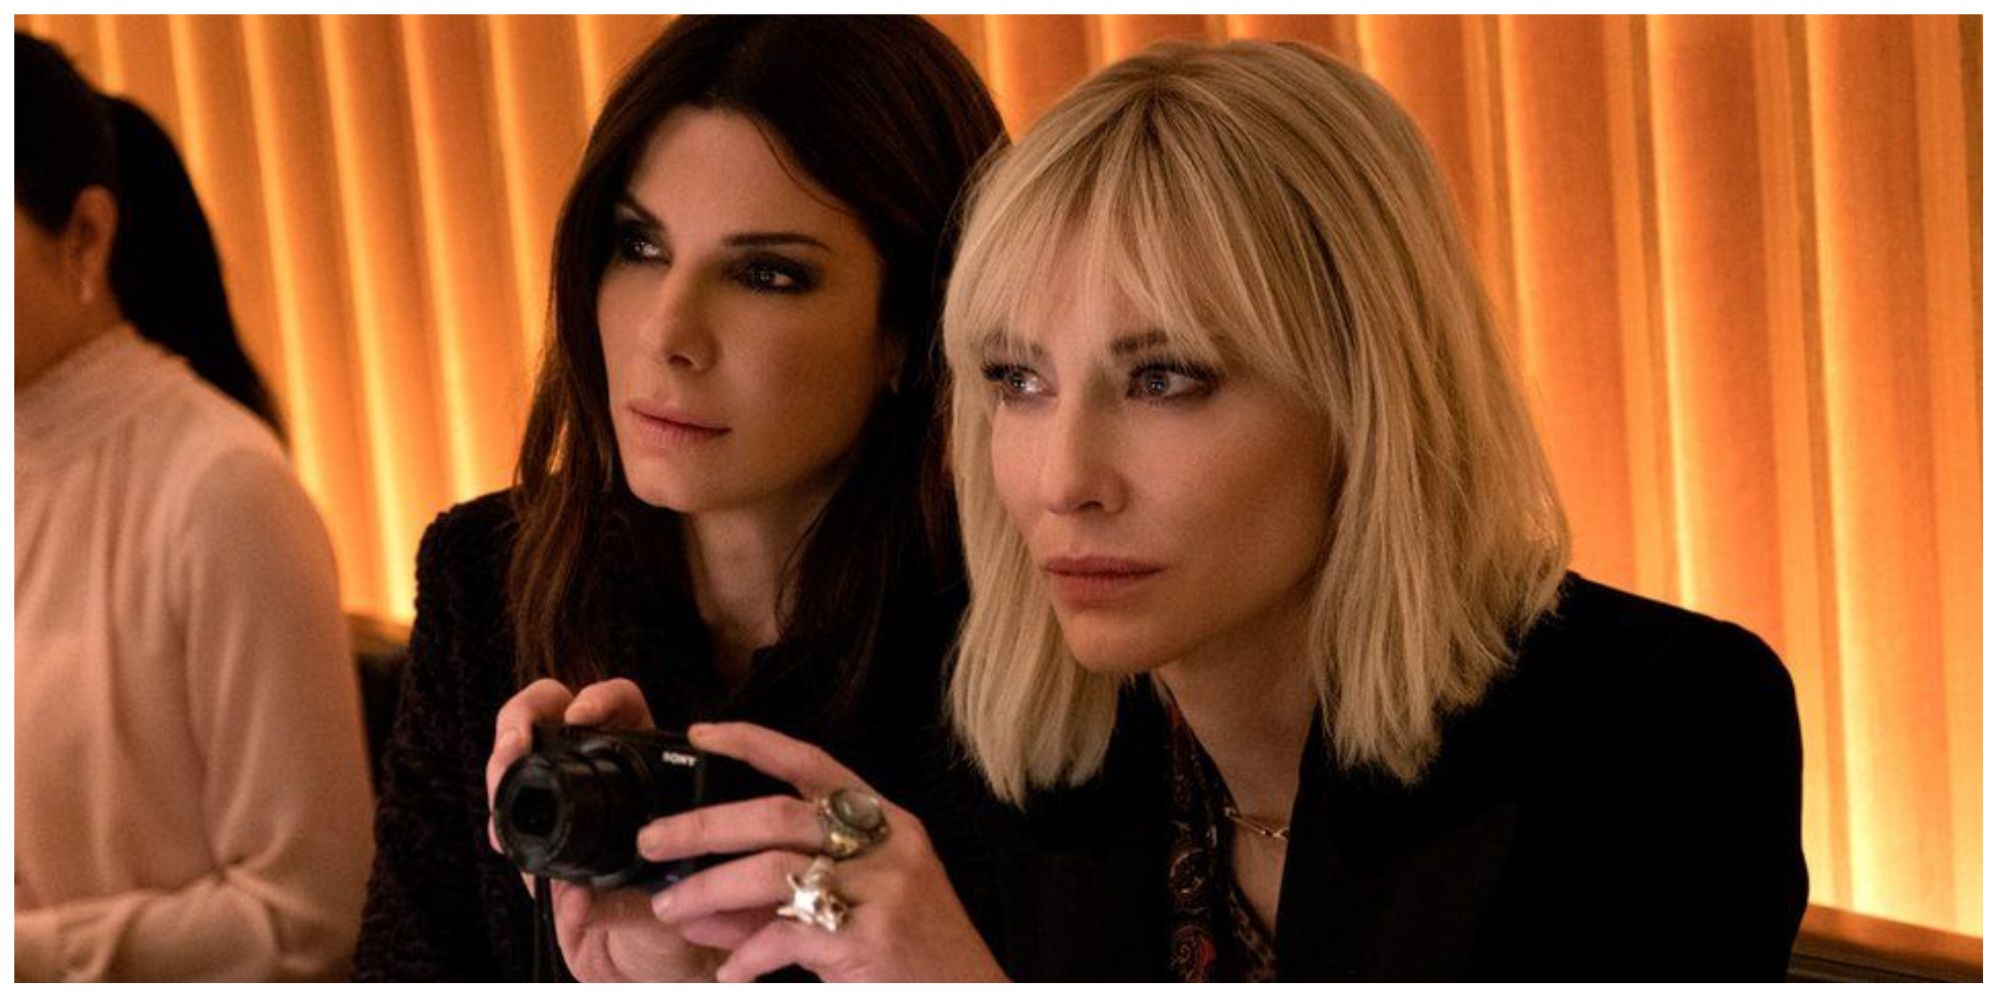 Cate Blanchett in Ocean's 8 taking pictures with a camera, whilst stood next to Sandra Bullock. They are both looking at something off screen.